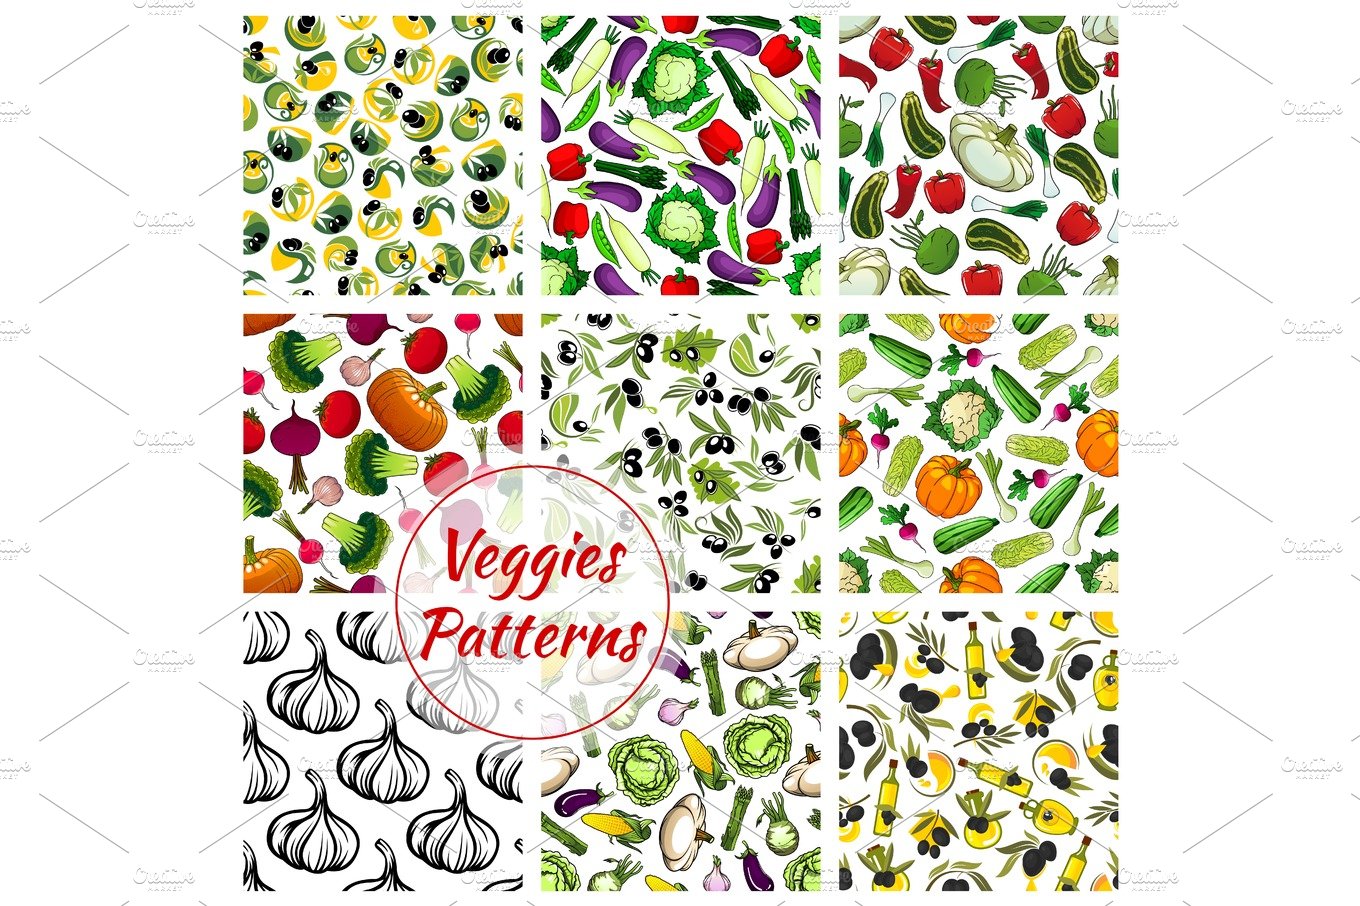 Vegetables seamless patterns set of veggies icons cover image.